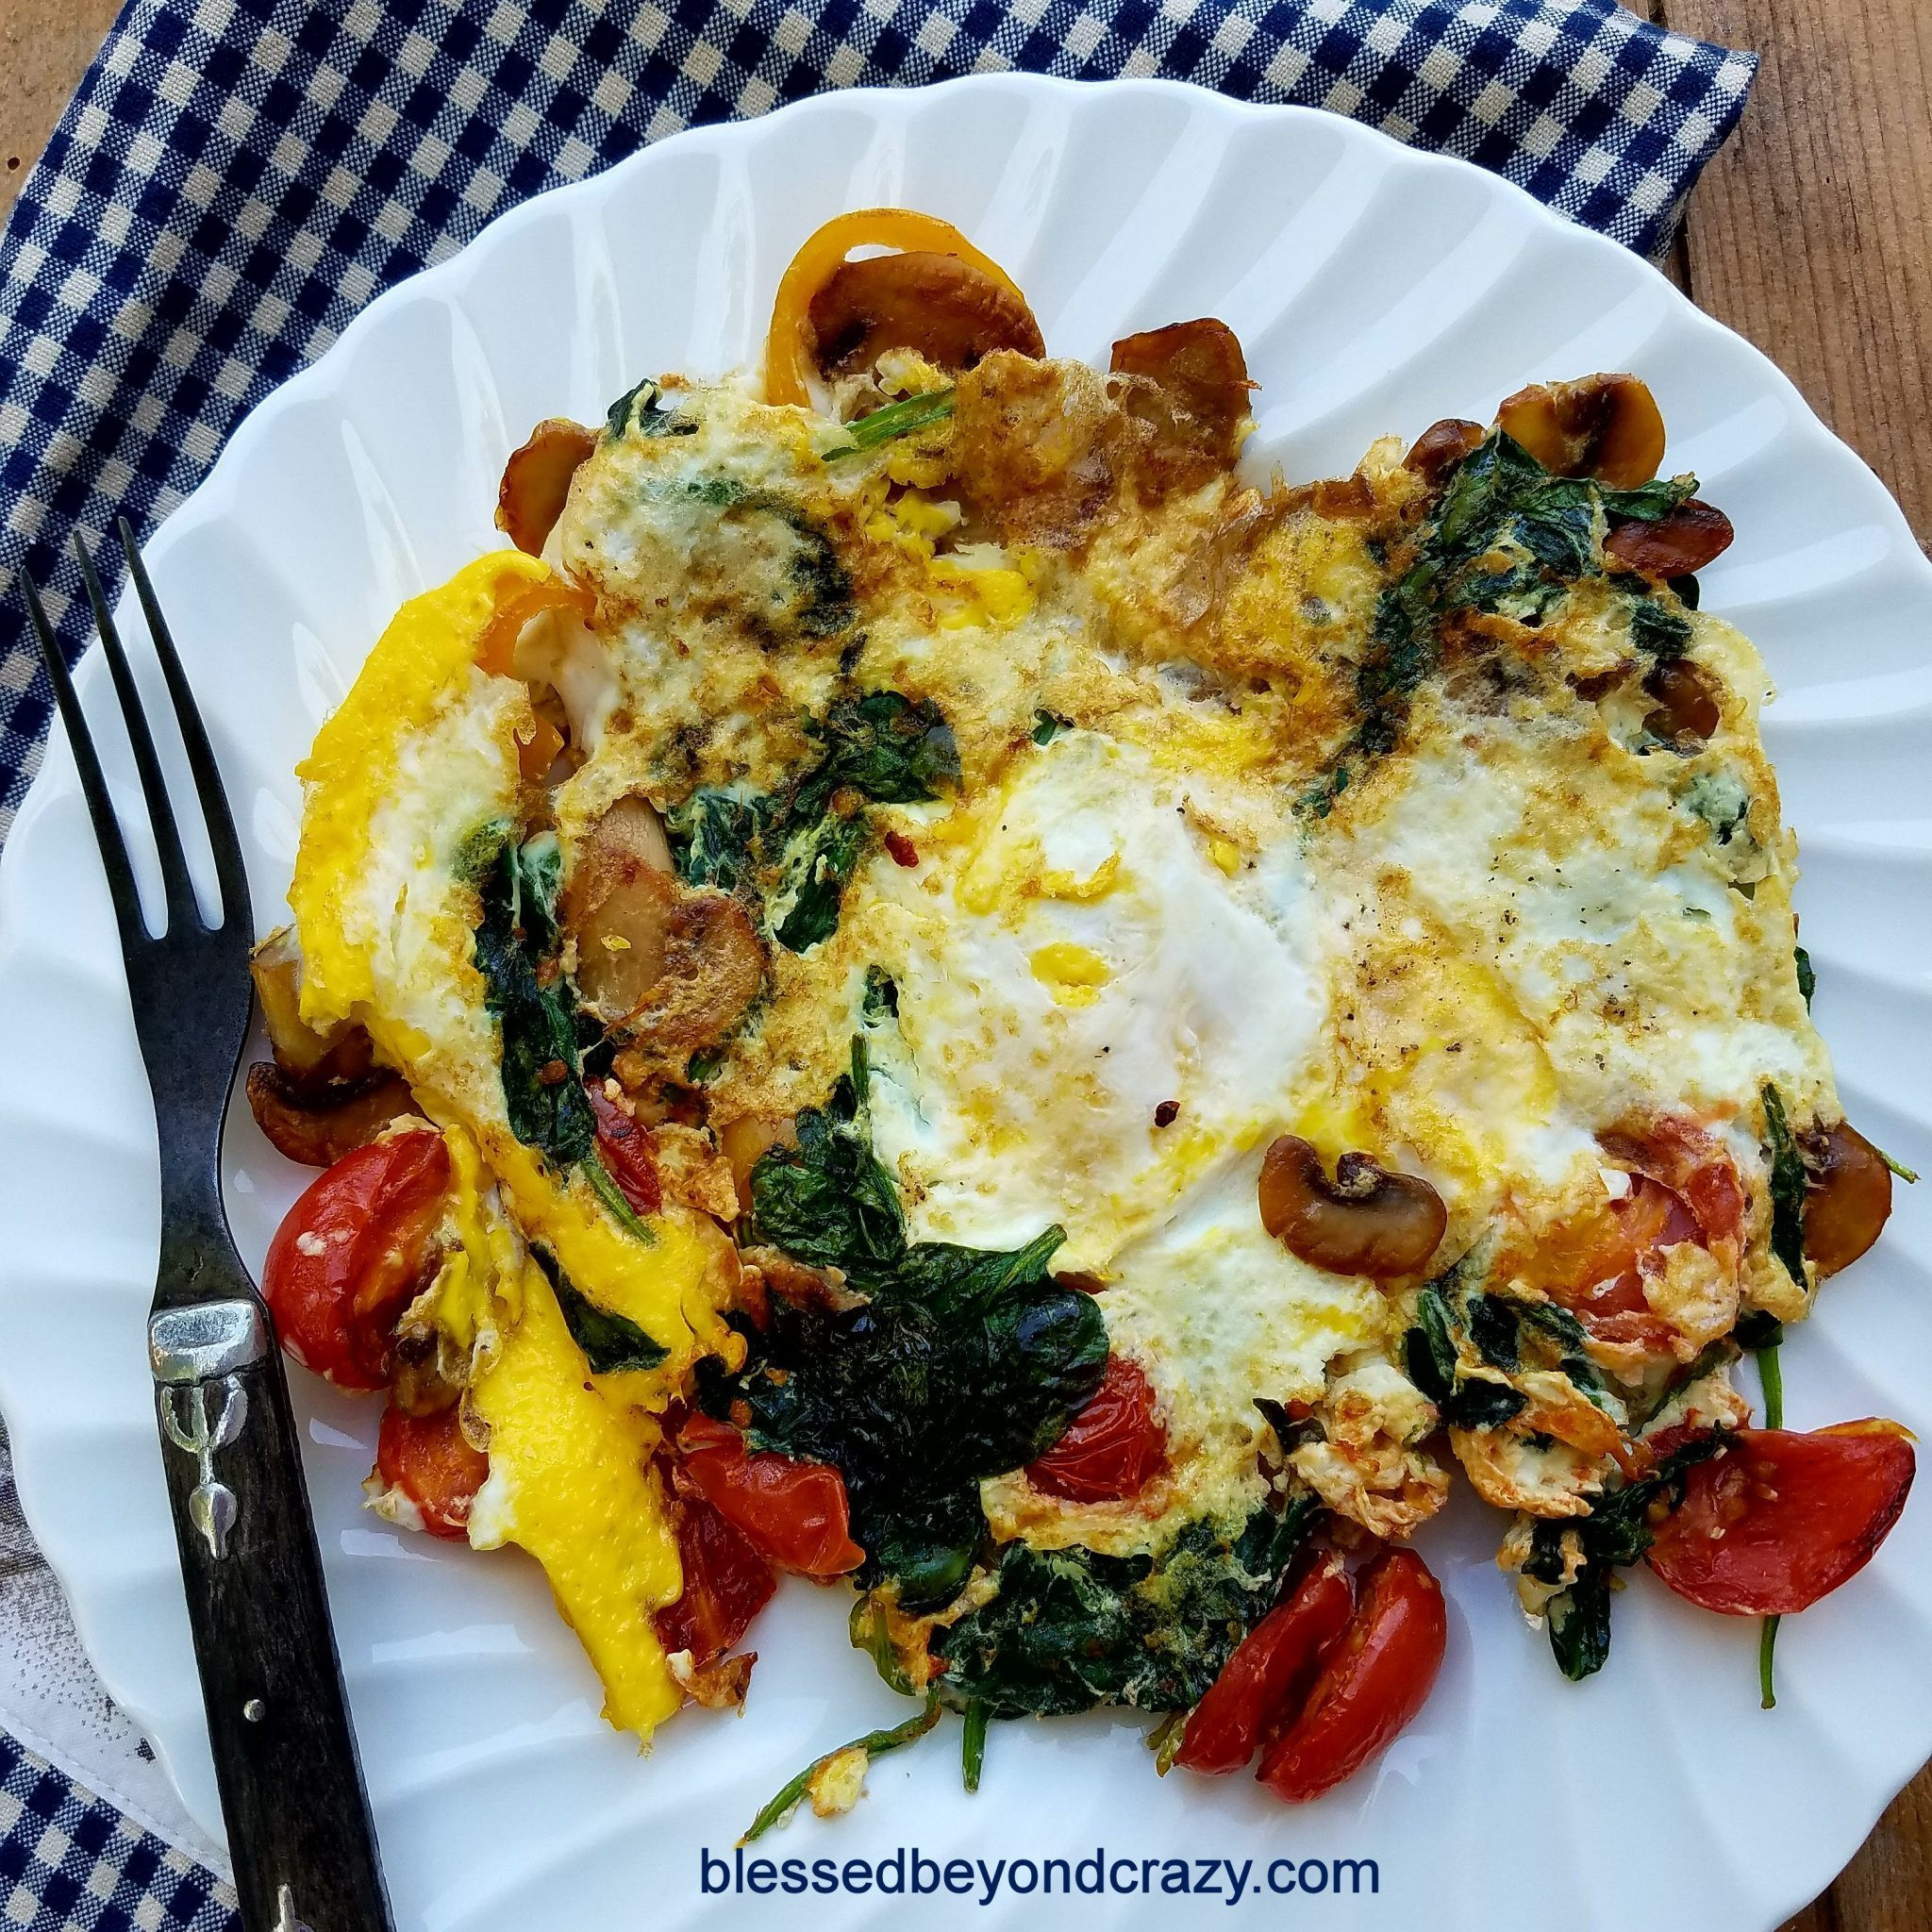 Healthy Egg Breakfast Recipes
 Quick and Healthy Egg and Veggie Skillet Breakfast